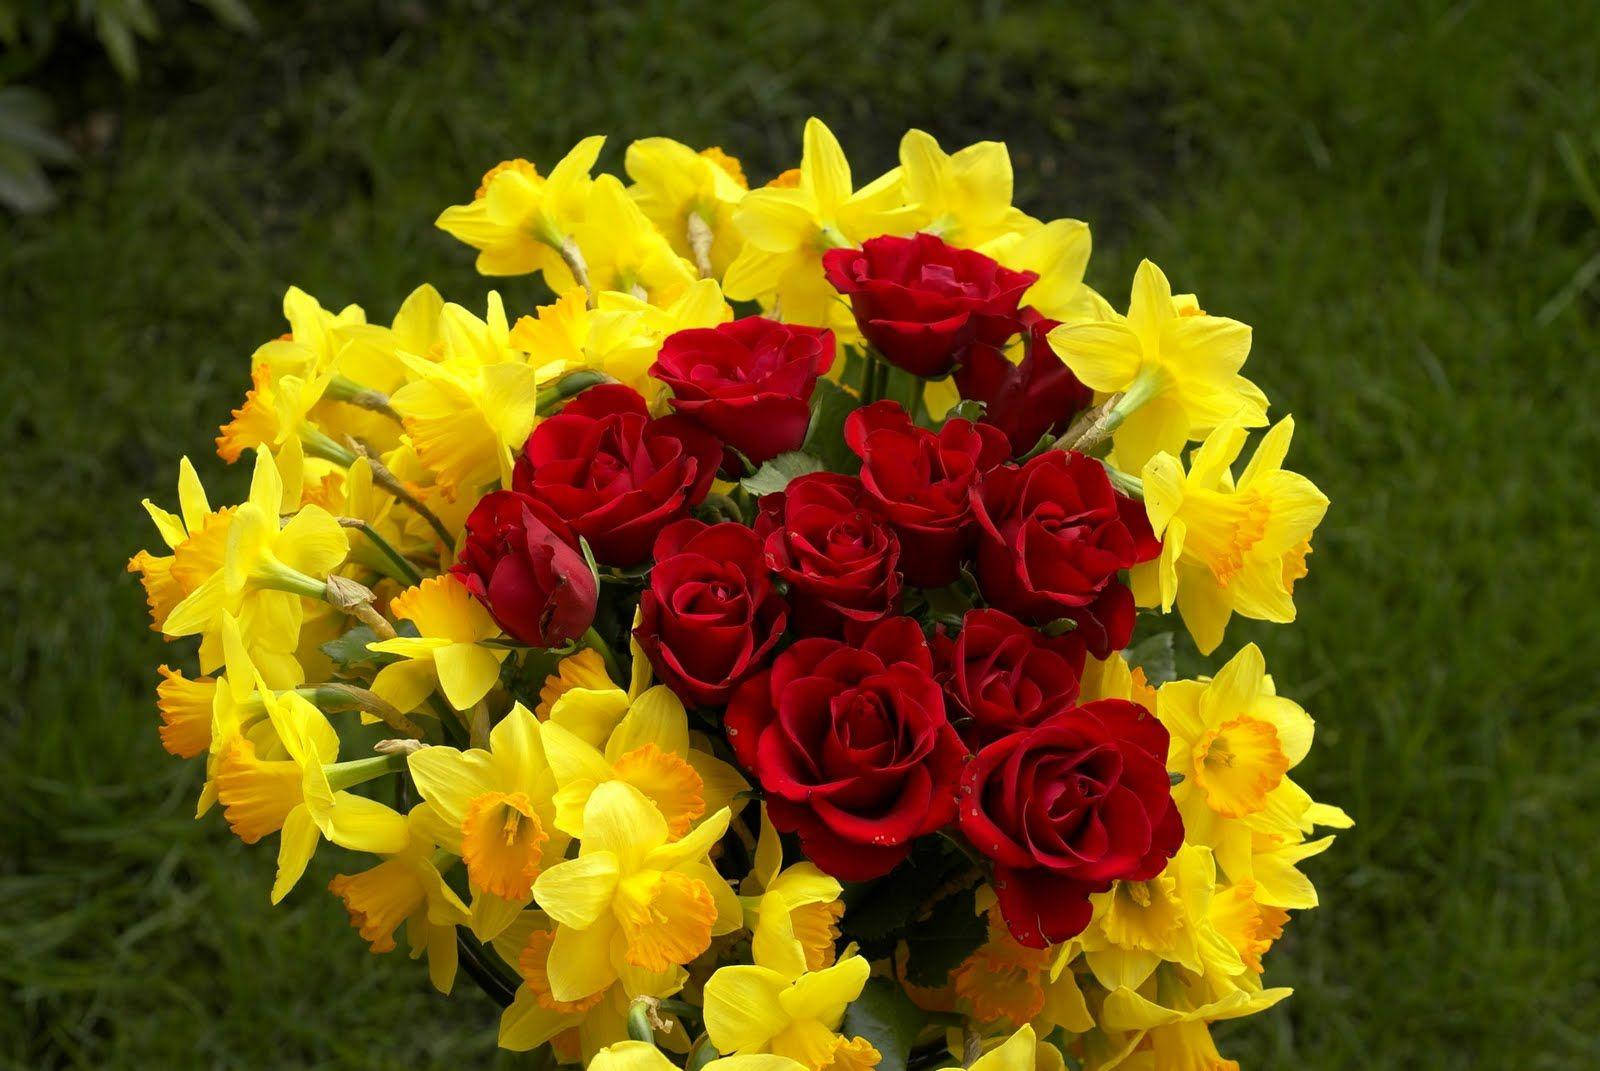 Daffodil And Rose Flowers Wallpaper